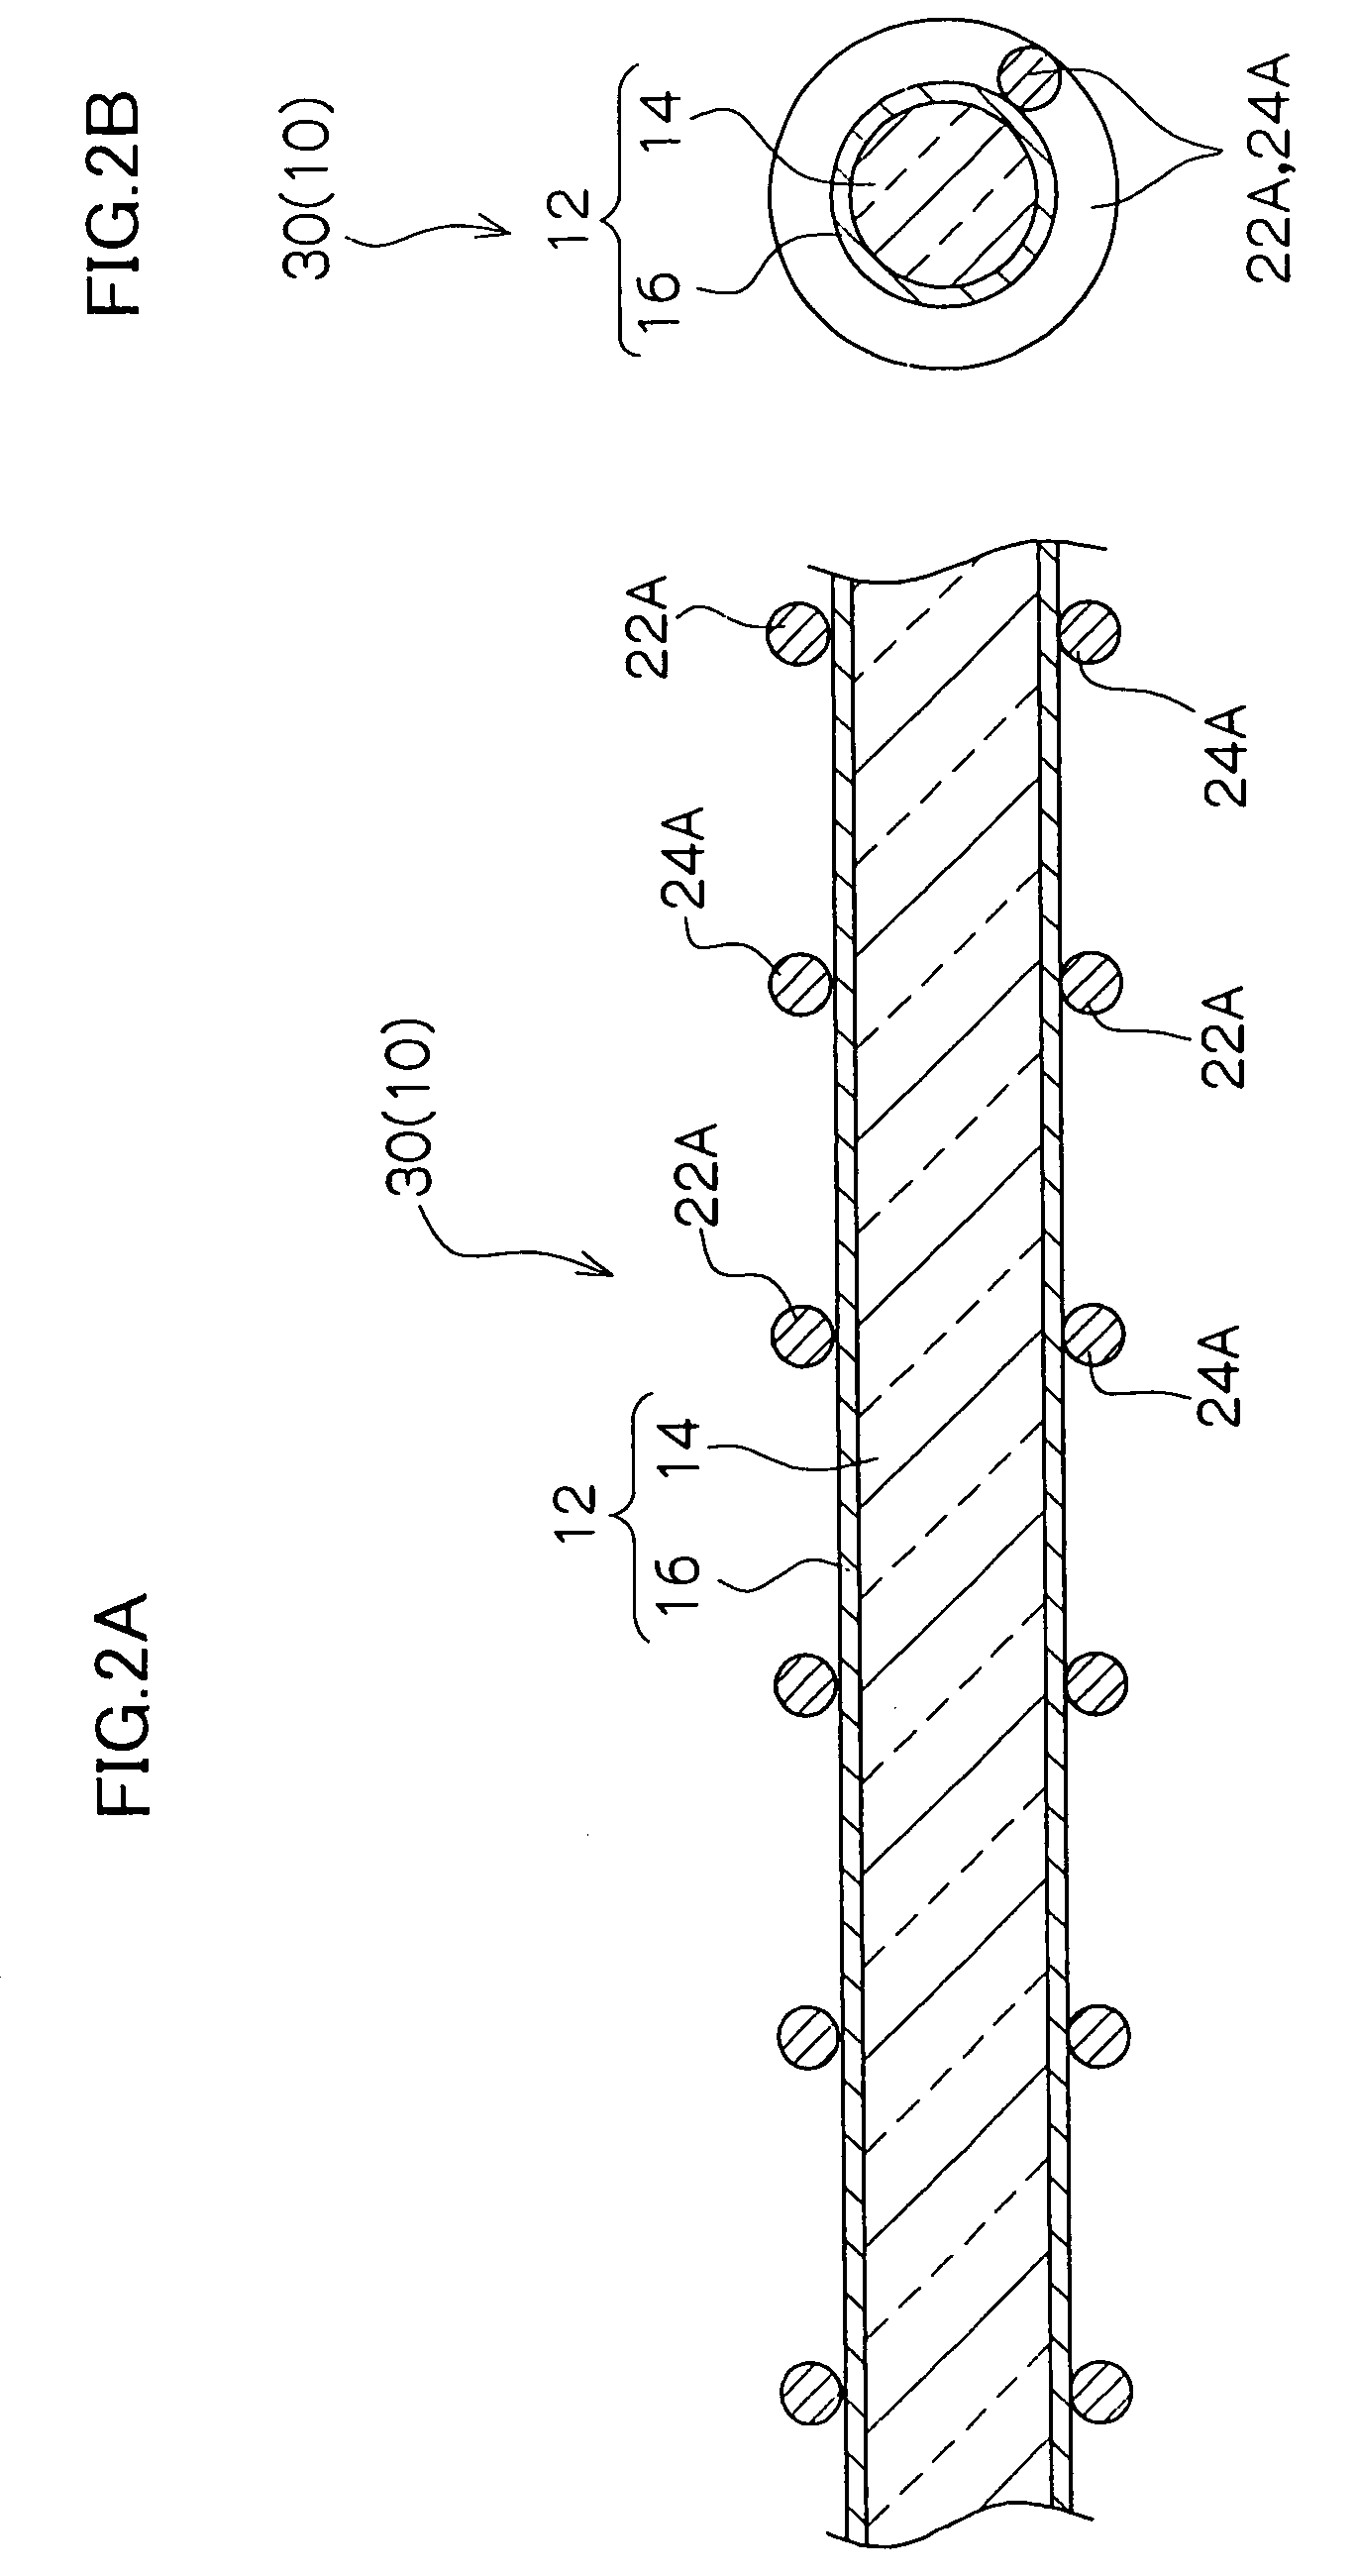 Load detecting device